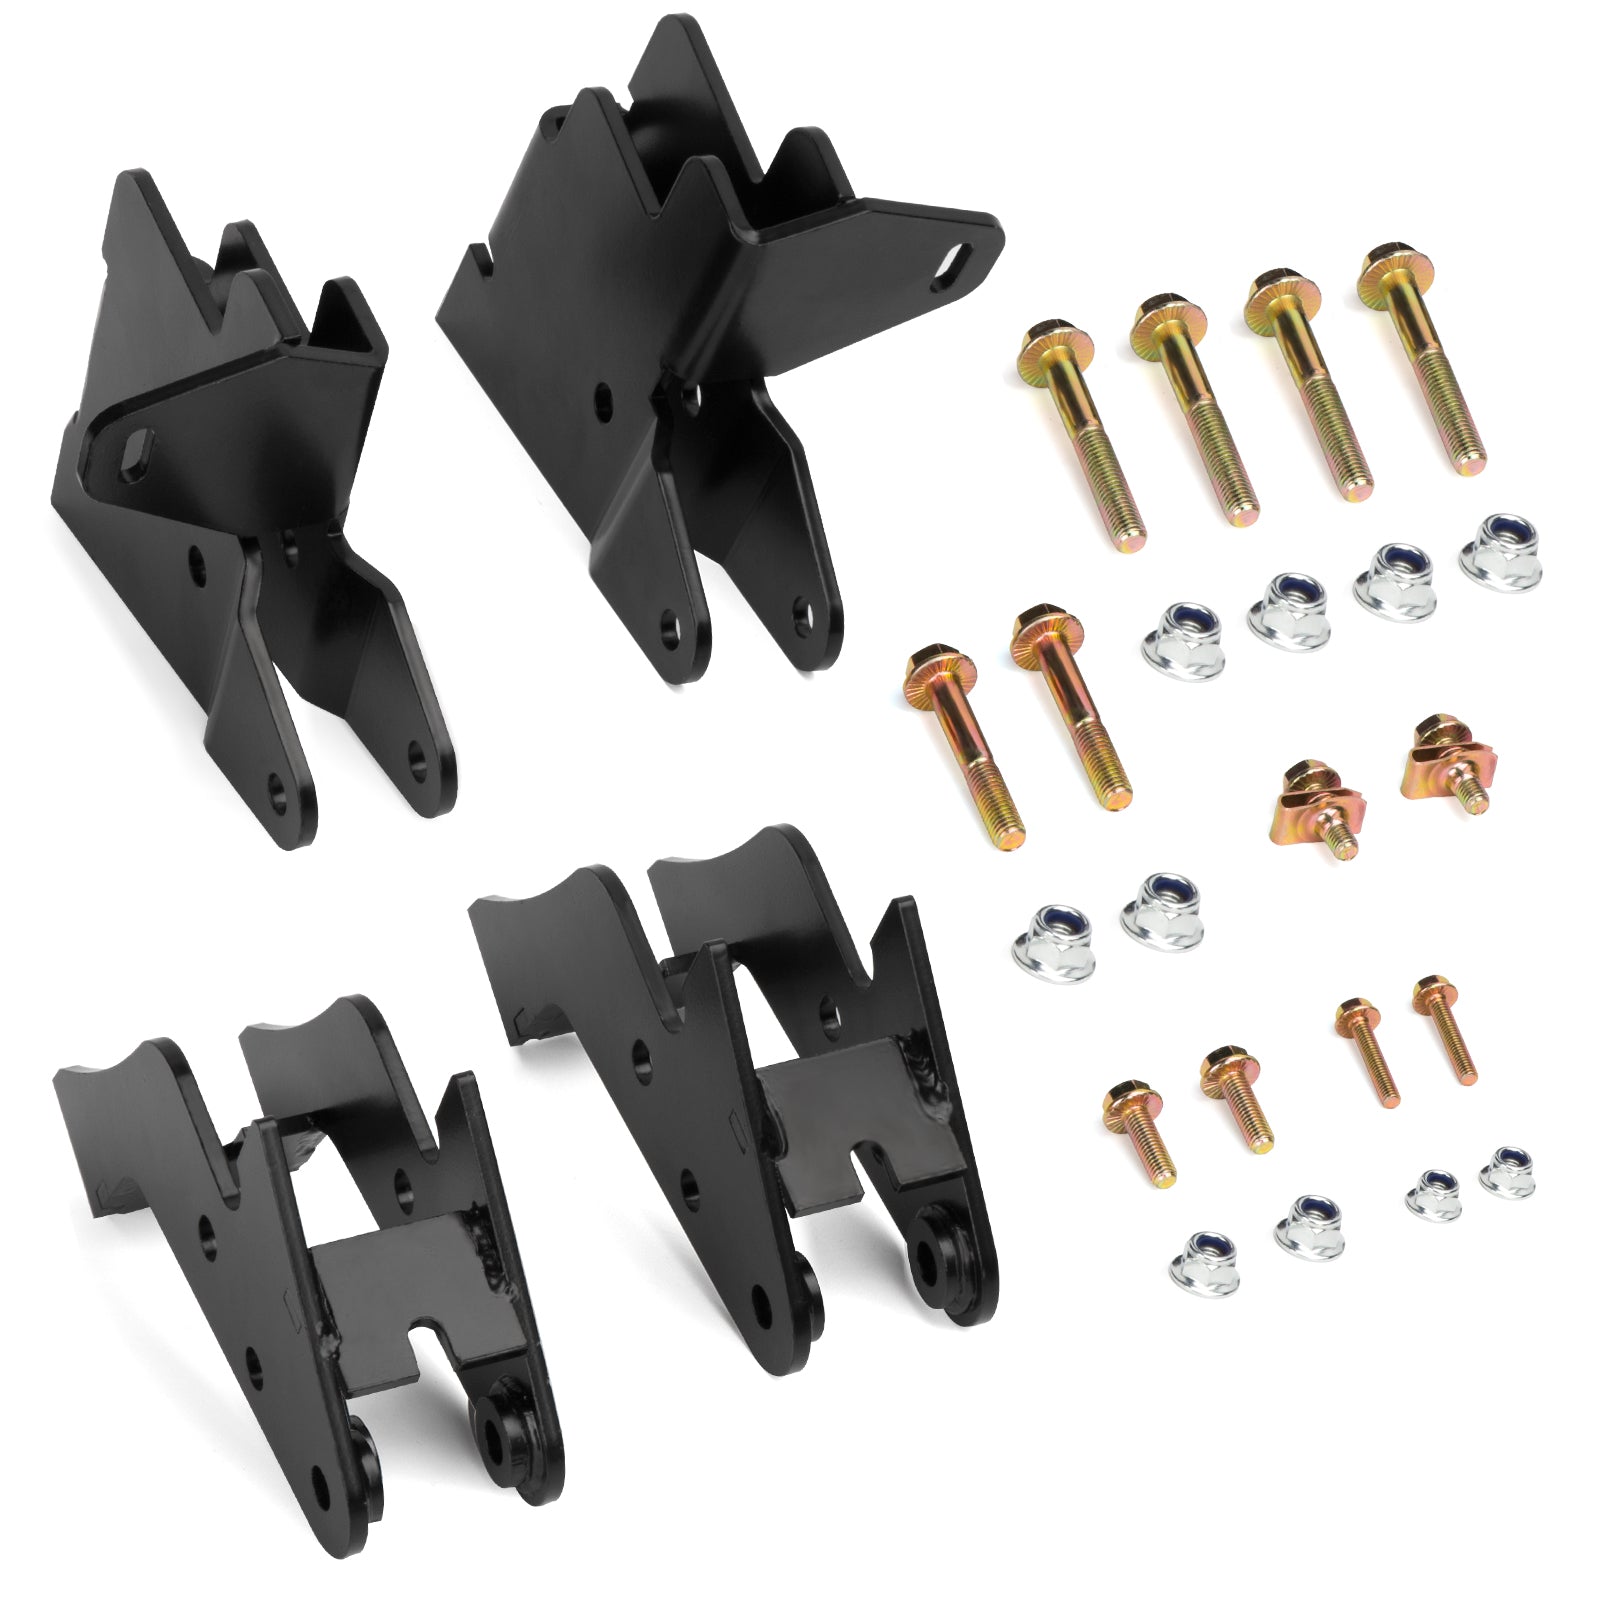 For 11-20 Can-Am Commander 800/1000 2.5inches Full Lift Kits ATV/UTV Suspenison Accessories xccscss.